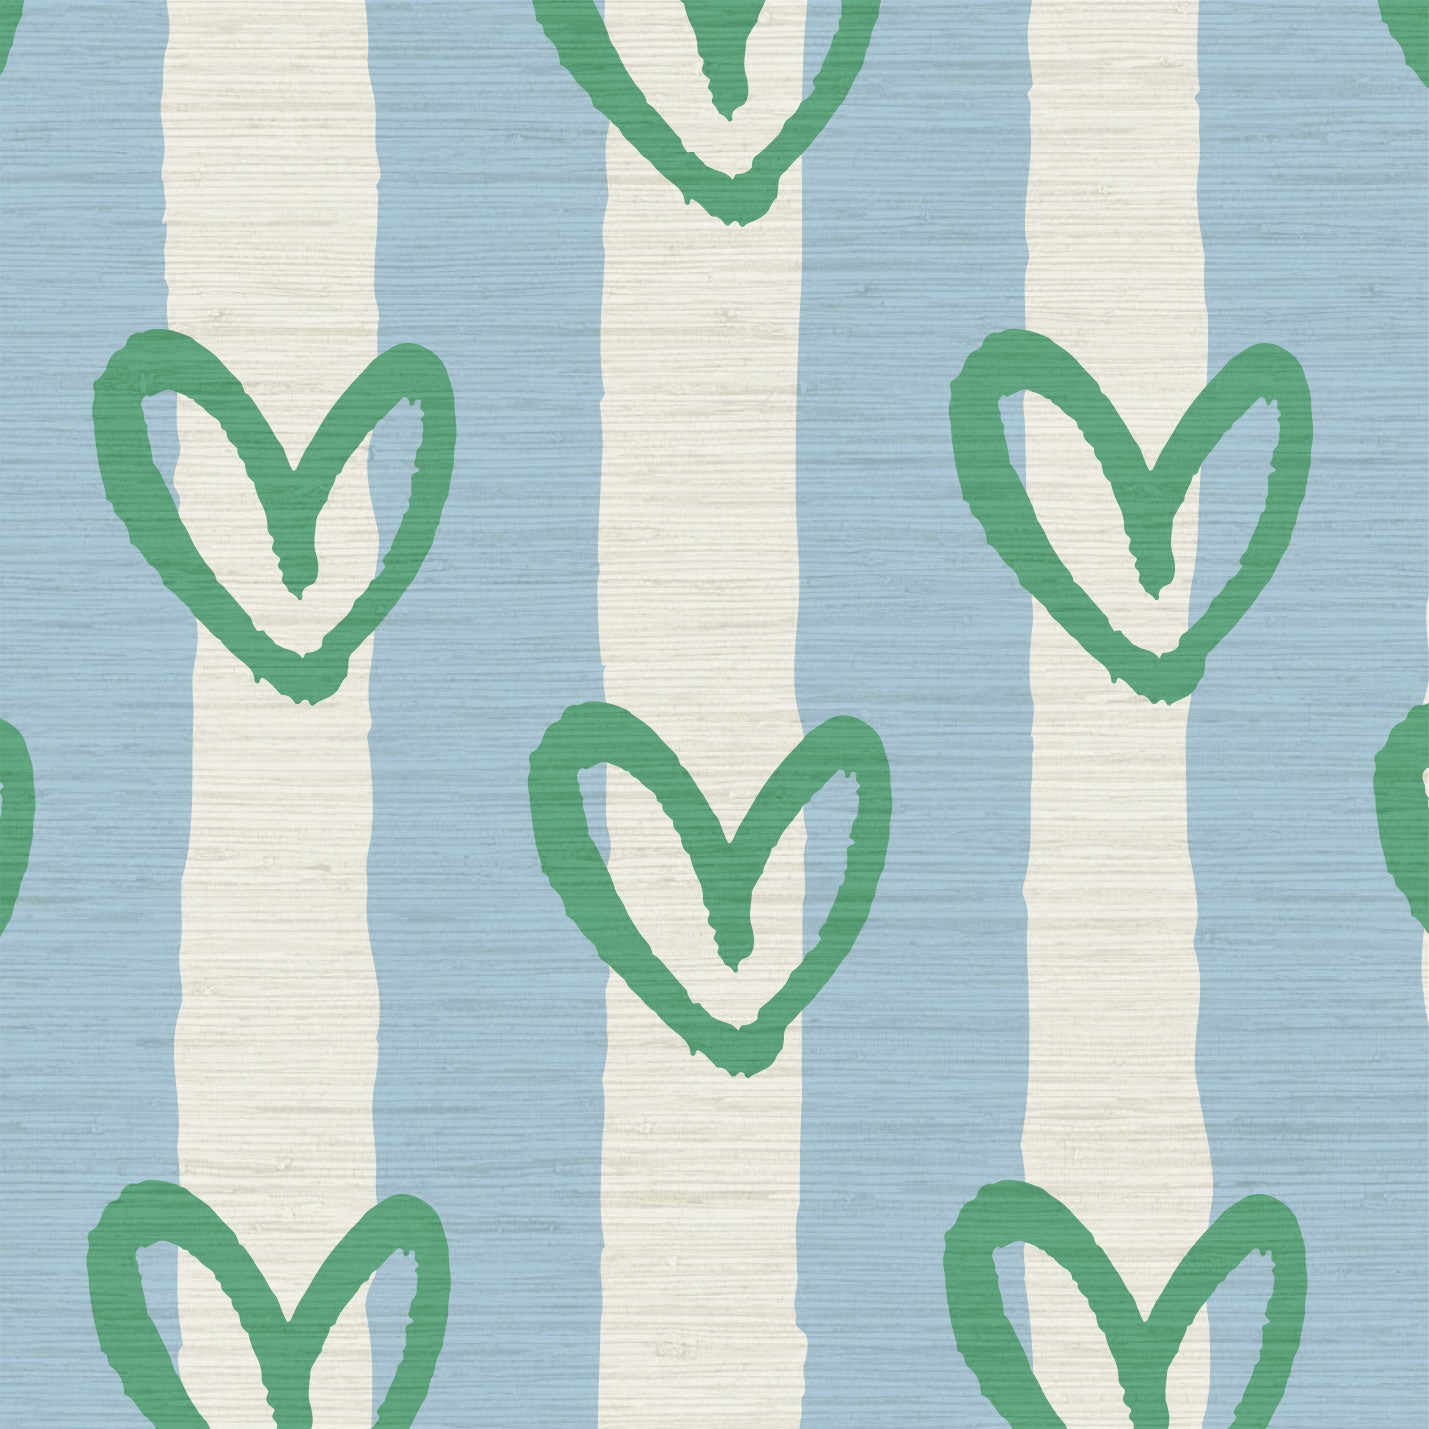 hearts vertical wide stripes house of shan collaboration kids playroom nursery Grasscloth wallpaper Natural Textured Eco-Friendly Non-toxic High-quality Sustainable Interior Design Bold Custom Tailor-made Retro chic Bold fun french blue white green living room nursery kids bedroom